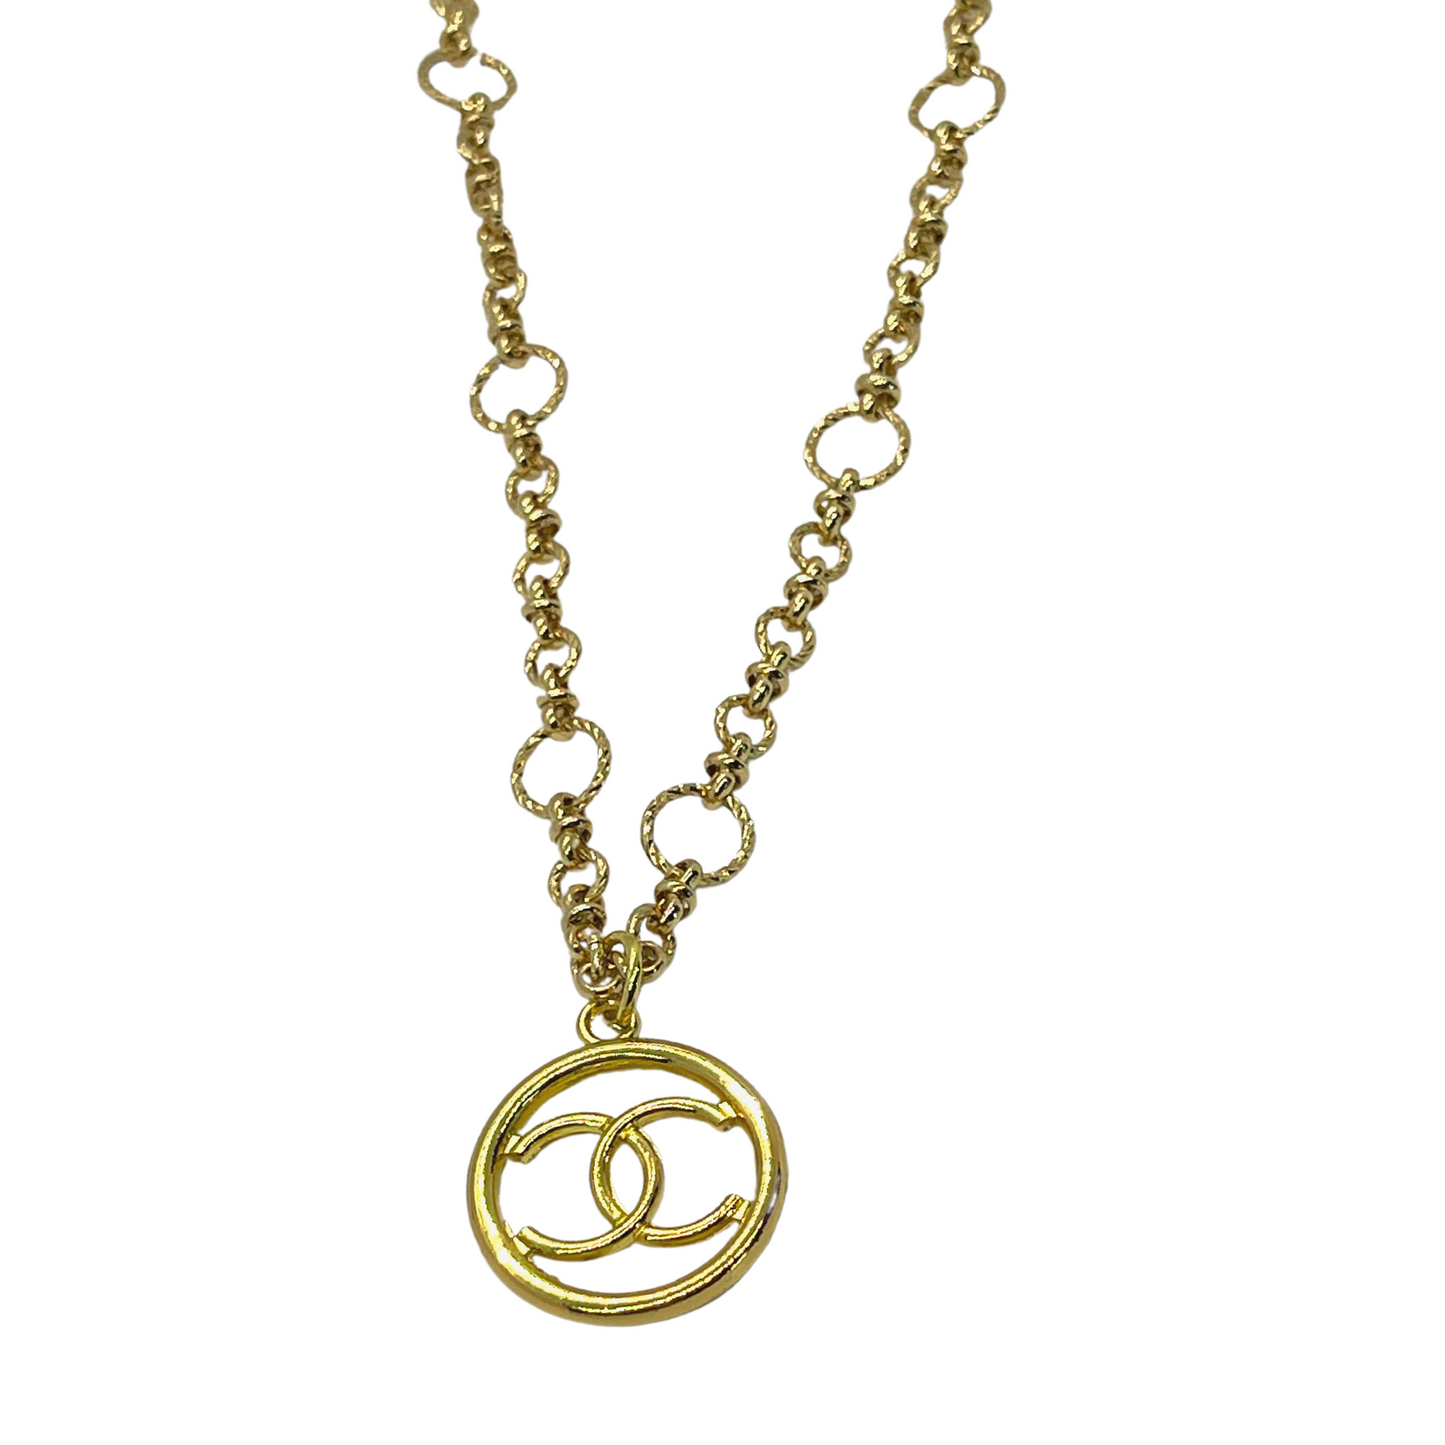 Authentic Chanel Disk Pendant | Reworked Gold 16" Necklace